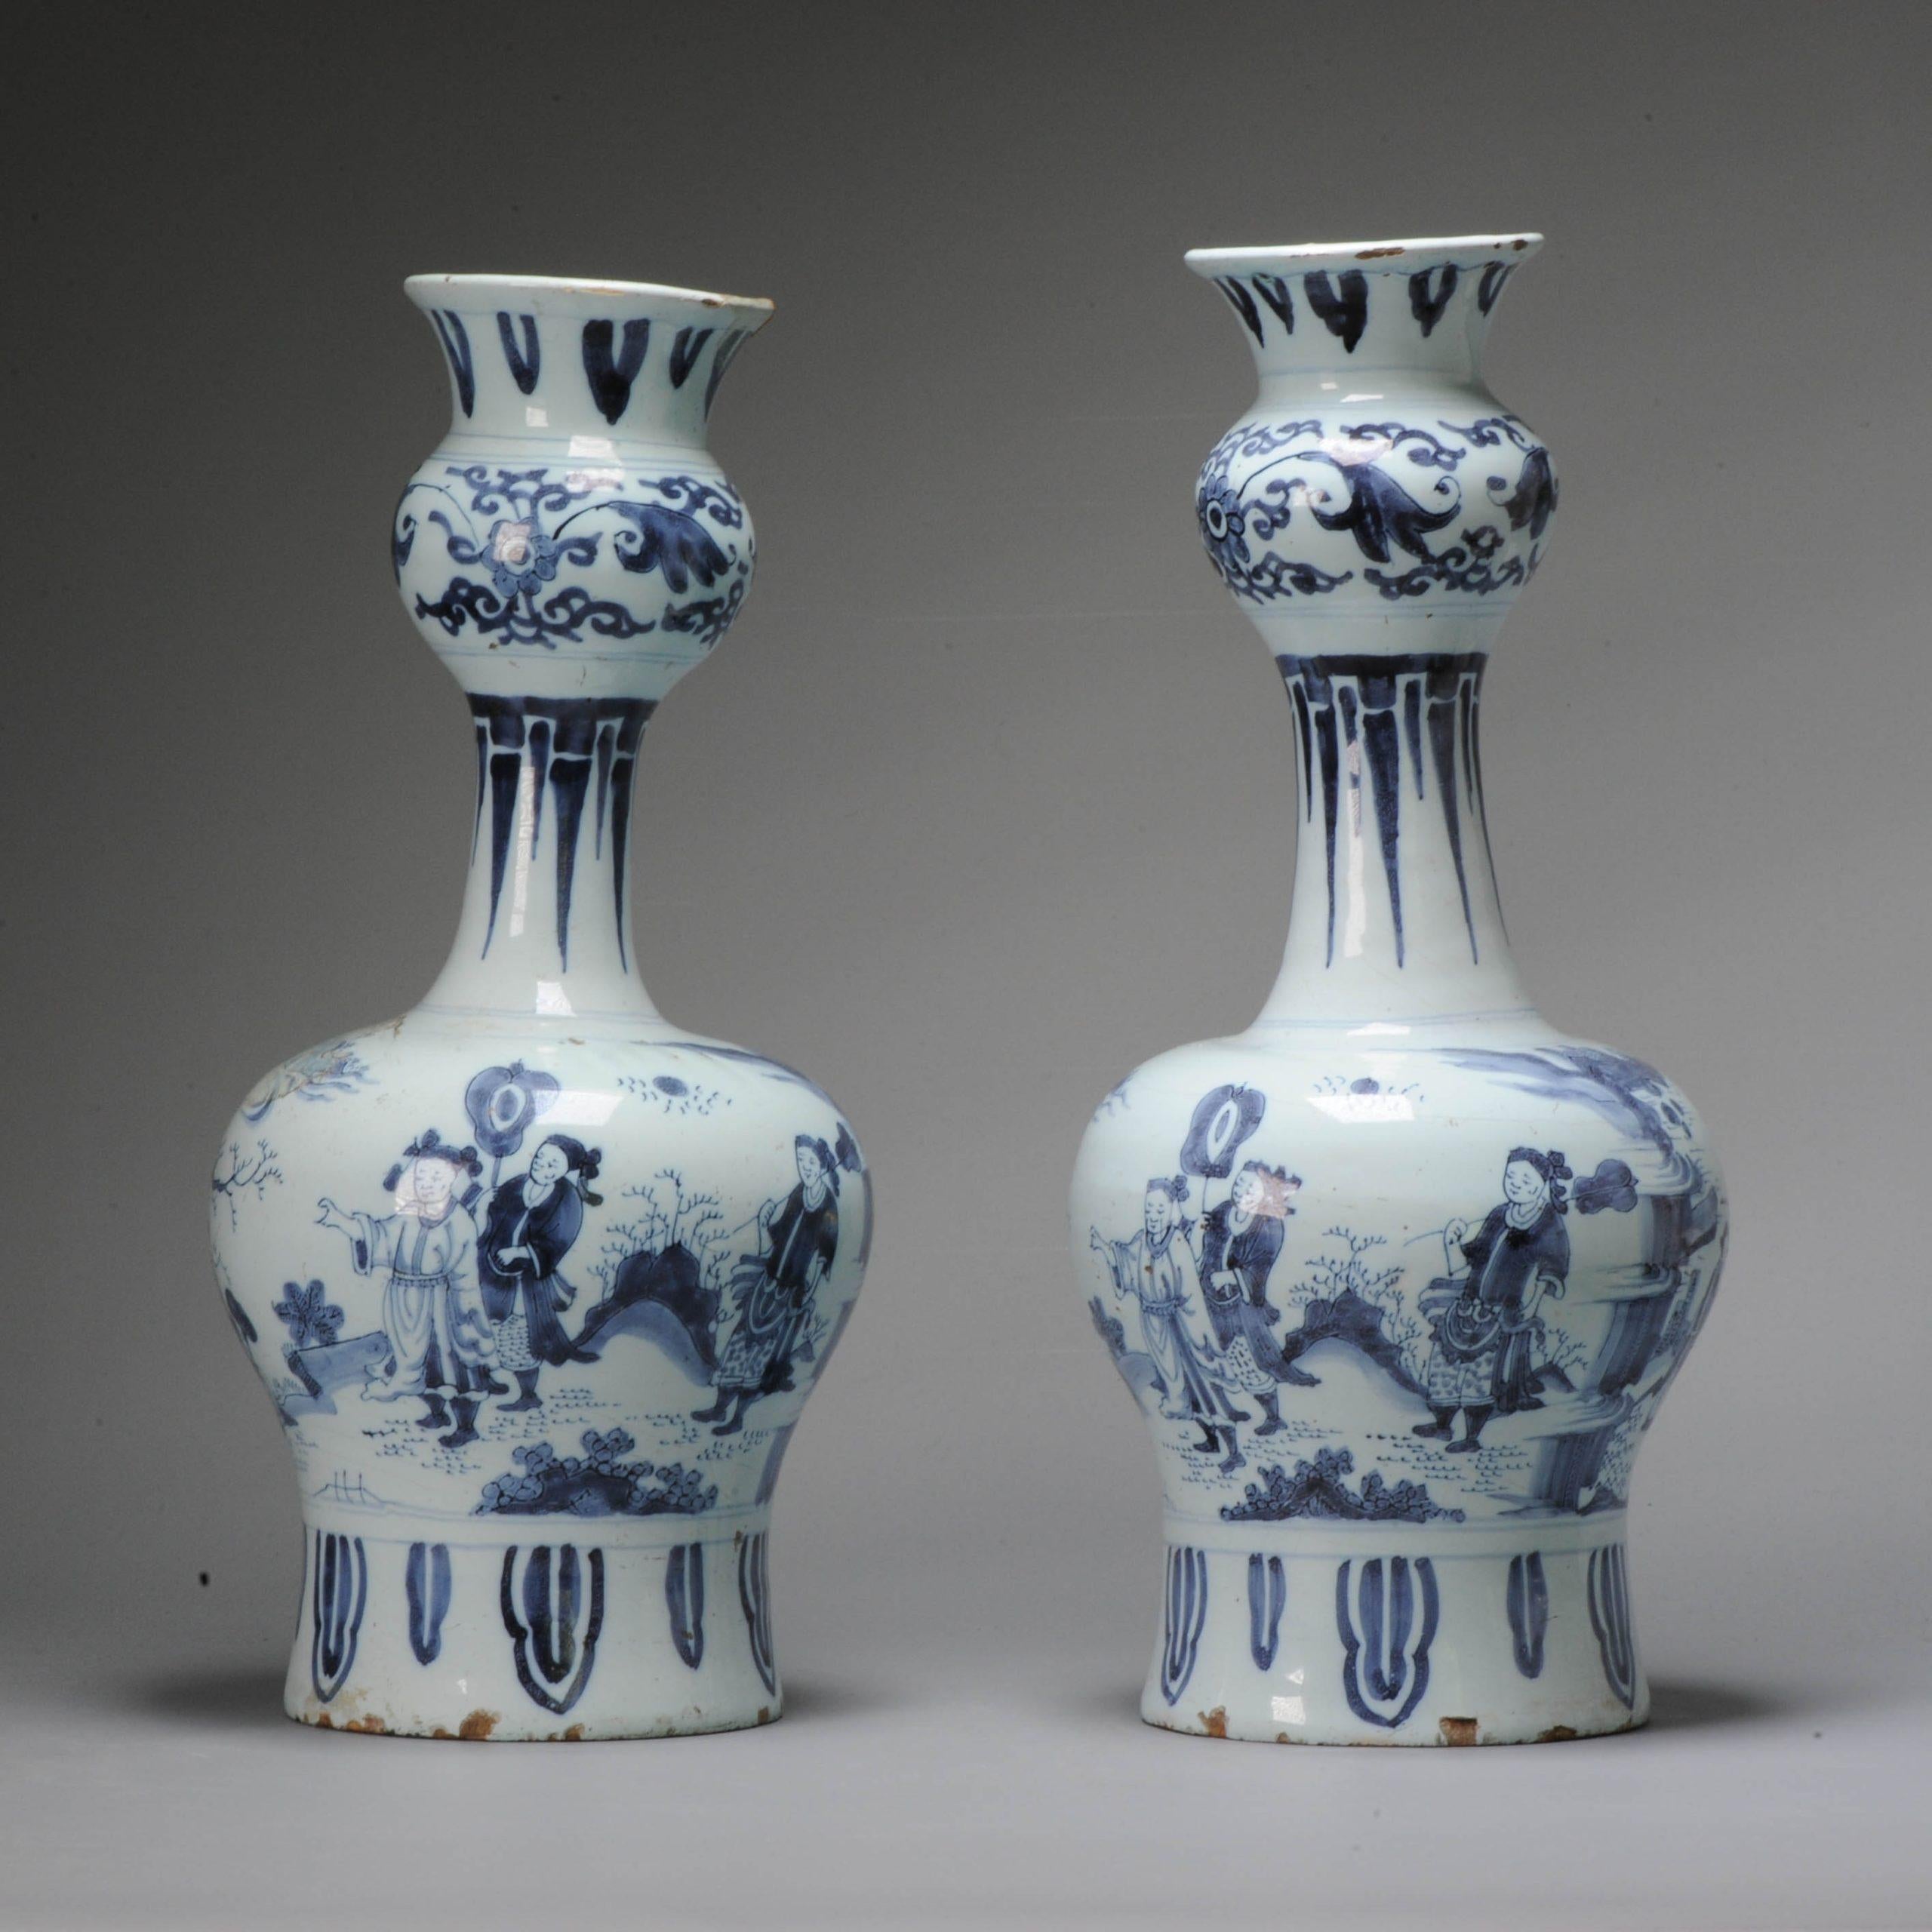 Description

17th/18th century

Height 340 mm approx, diameter 125 mm (4.33 inch), diameter of mouthrim 85 mm, diameter of foot 115 mm.

Earthenware double gourd vases with a large mouth. Decorated in different in blue on a white tin glaze in